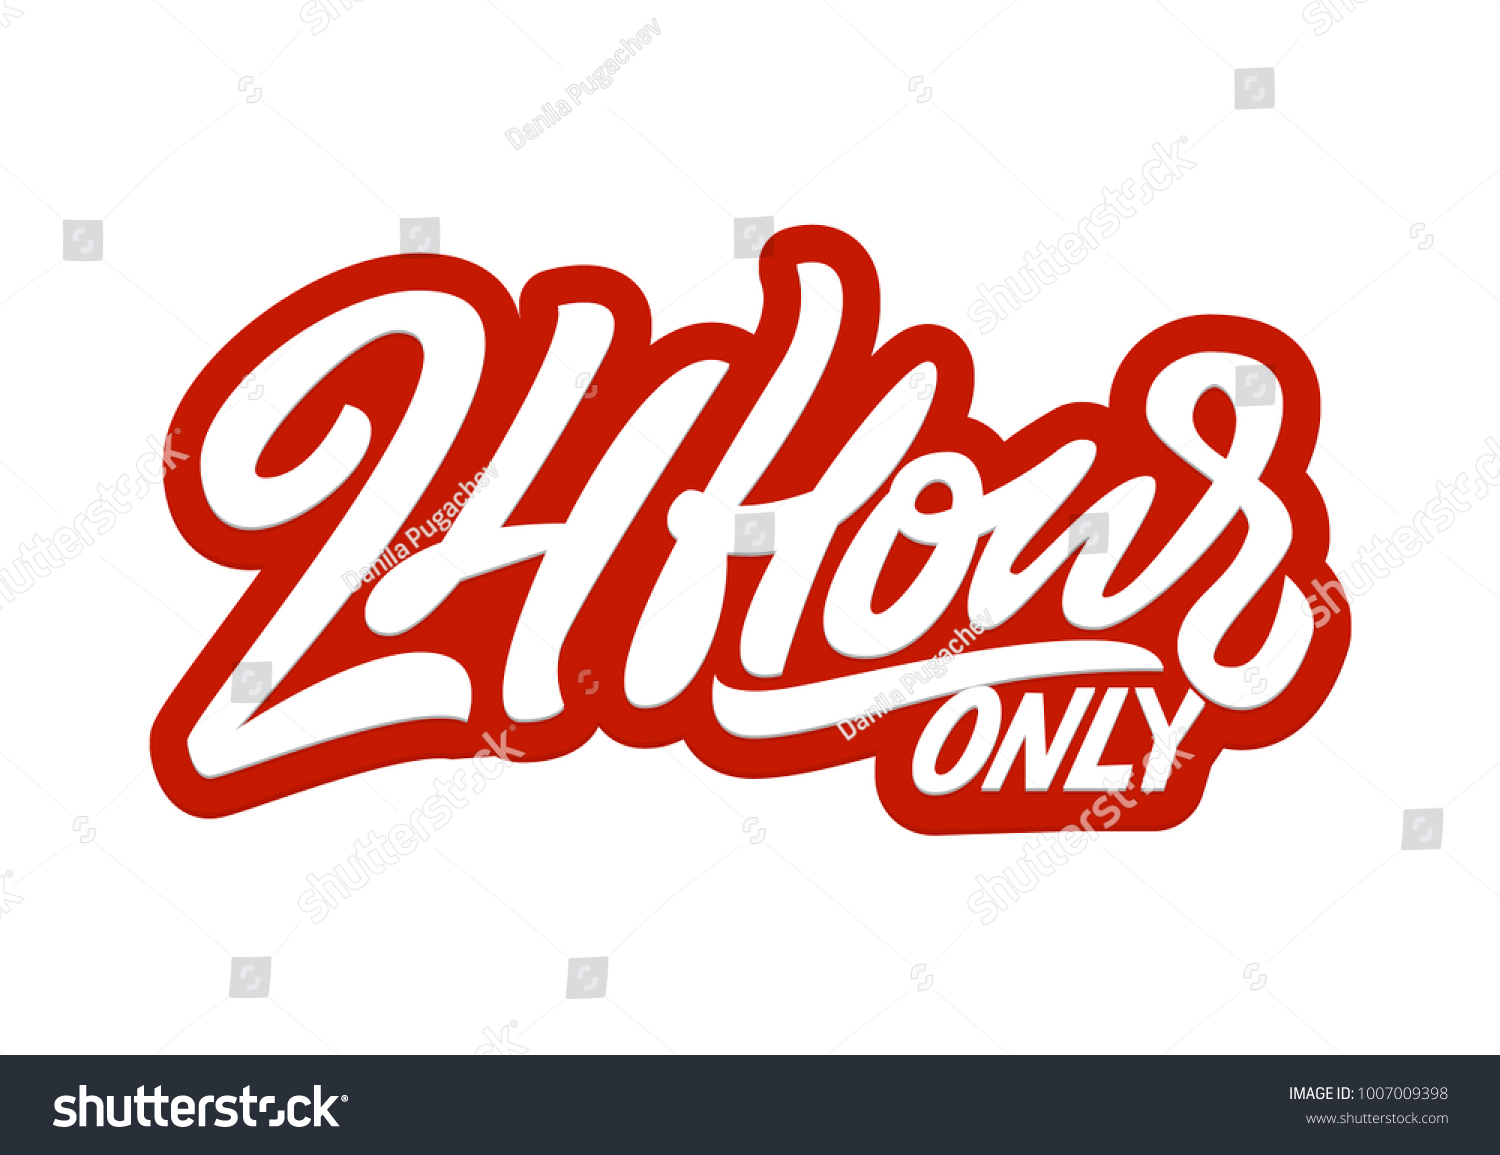 SVG of 24 hour only. Premium handmade vector lettering and calligraphy phrase for invitation, greeting card, t-shirt, prints, social media, banners and posters .Vector illustration. svg